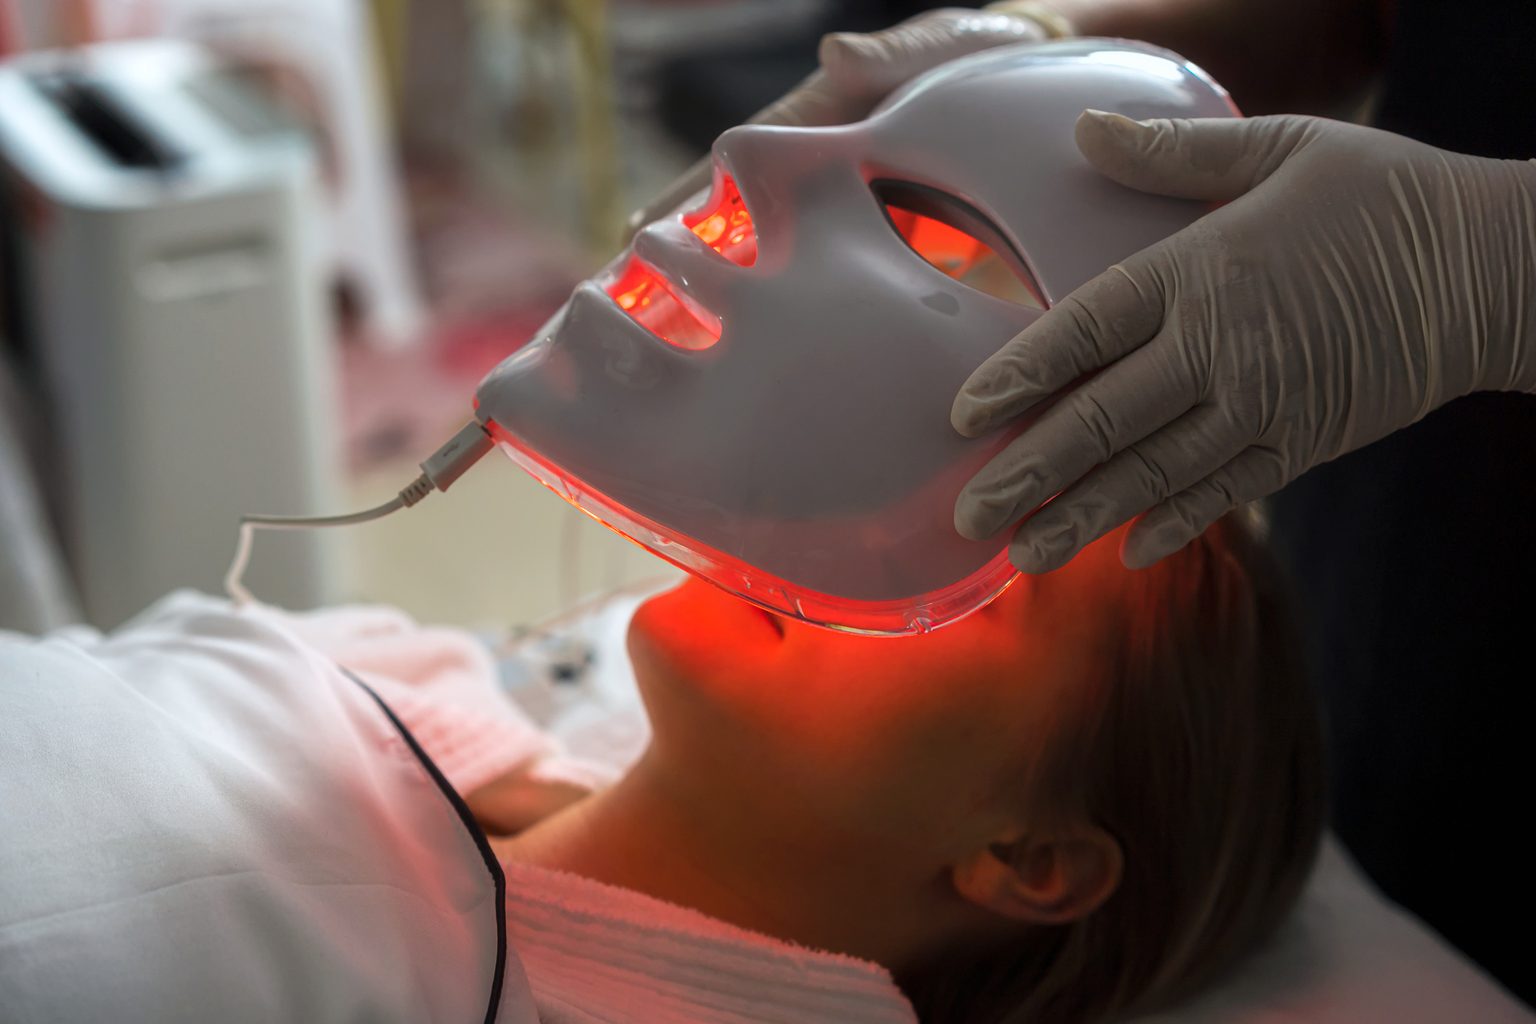 Blue Light Therapy for Acne Does It Work? The Healthy